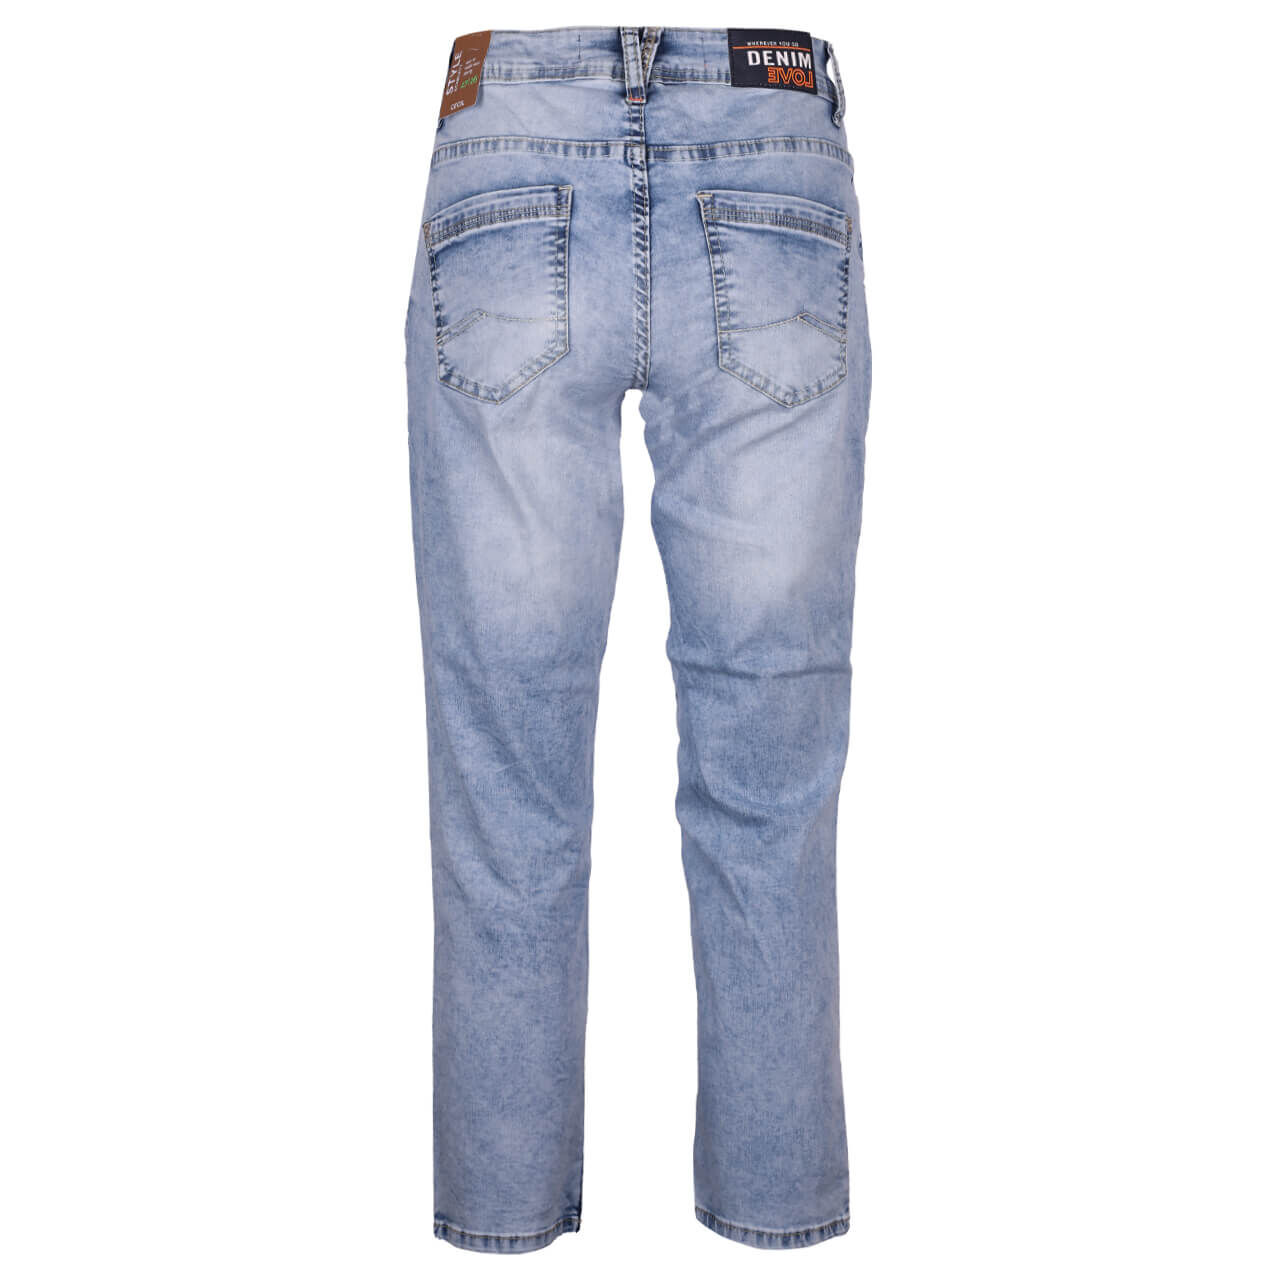 Cecil Scarlett 7/8 Jeans mid blue washed